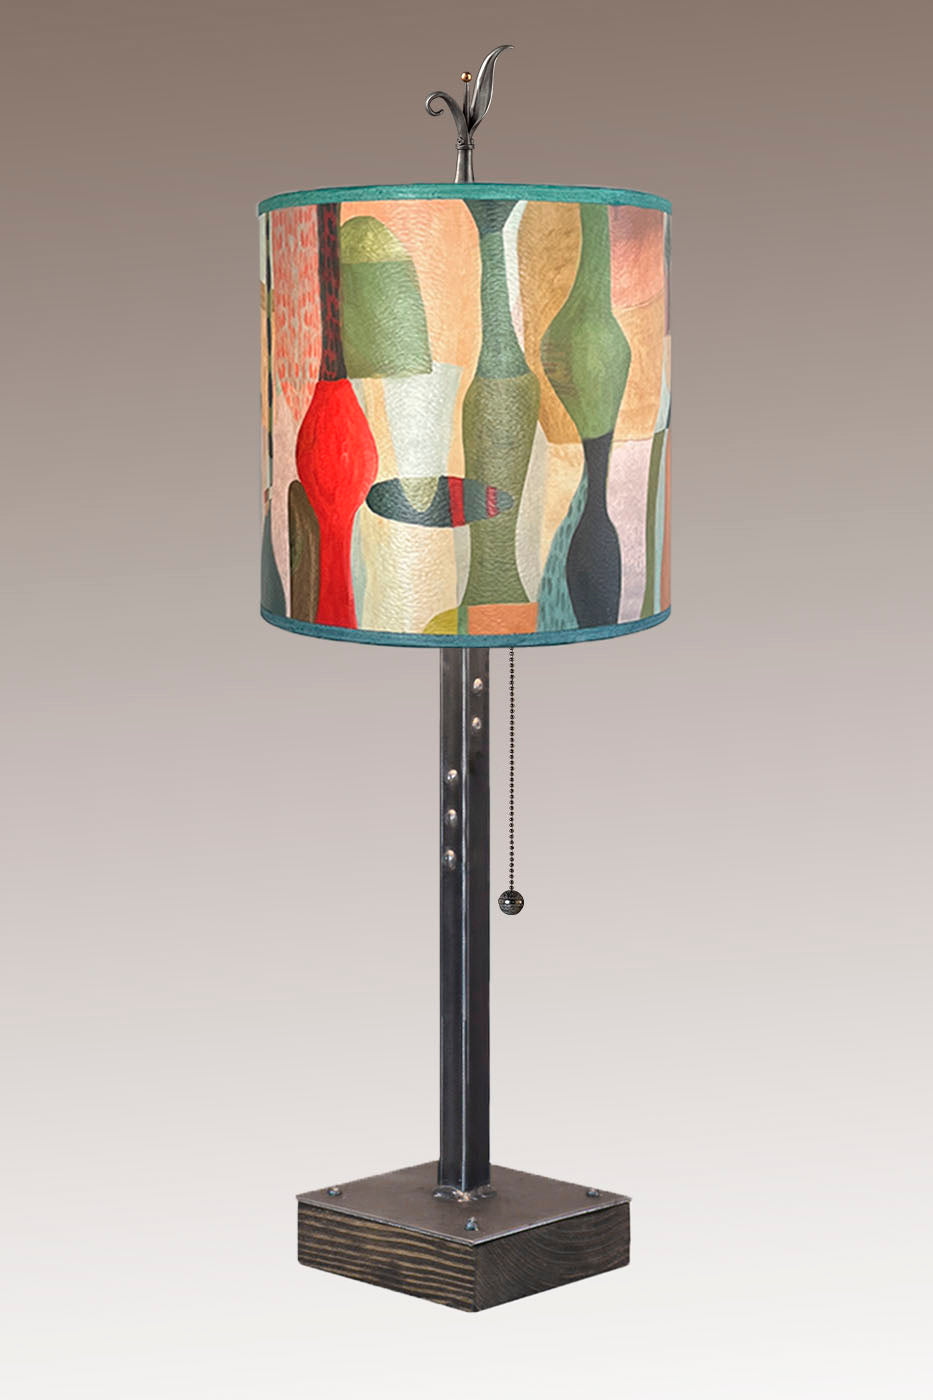 Janna Ugone & Co Table Lamp Steel Table Lamp on Wood with Medium Drum Shade in Riviera in Poppy